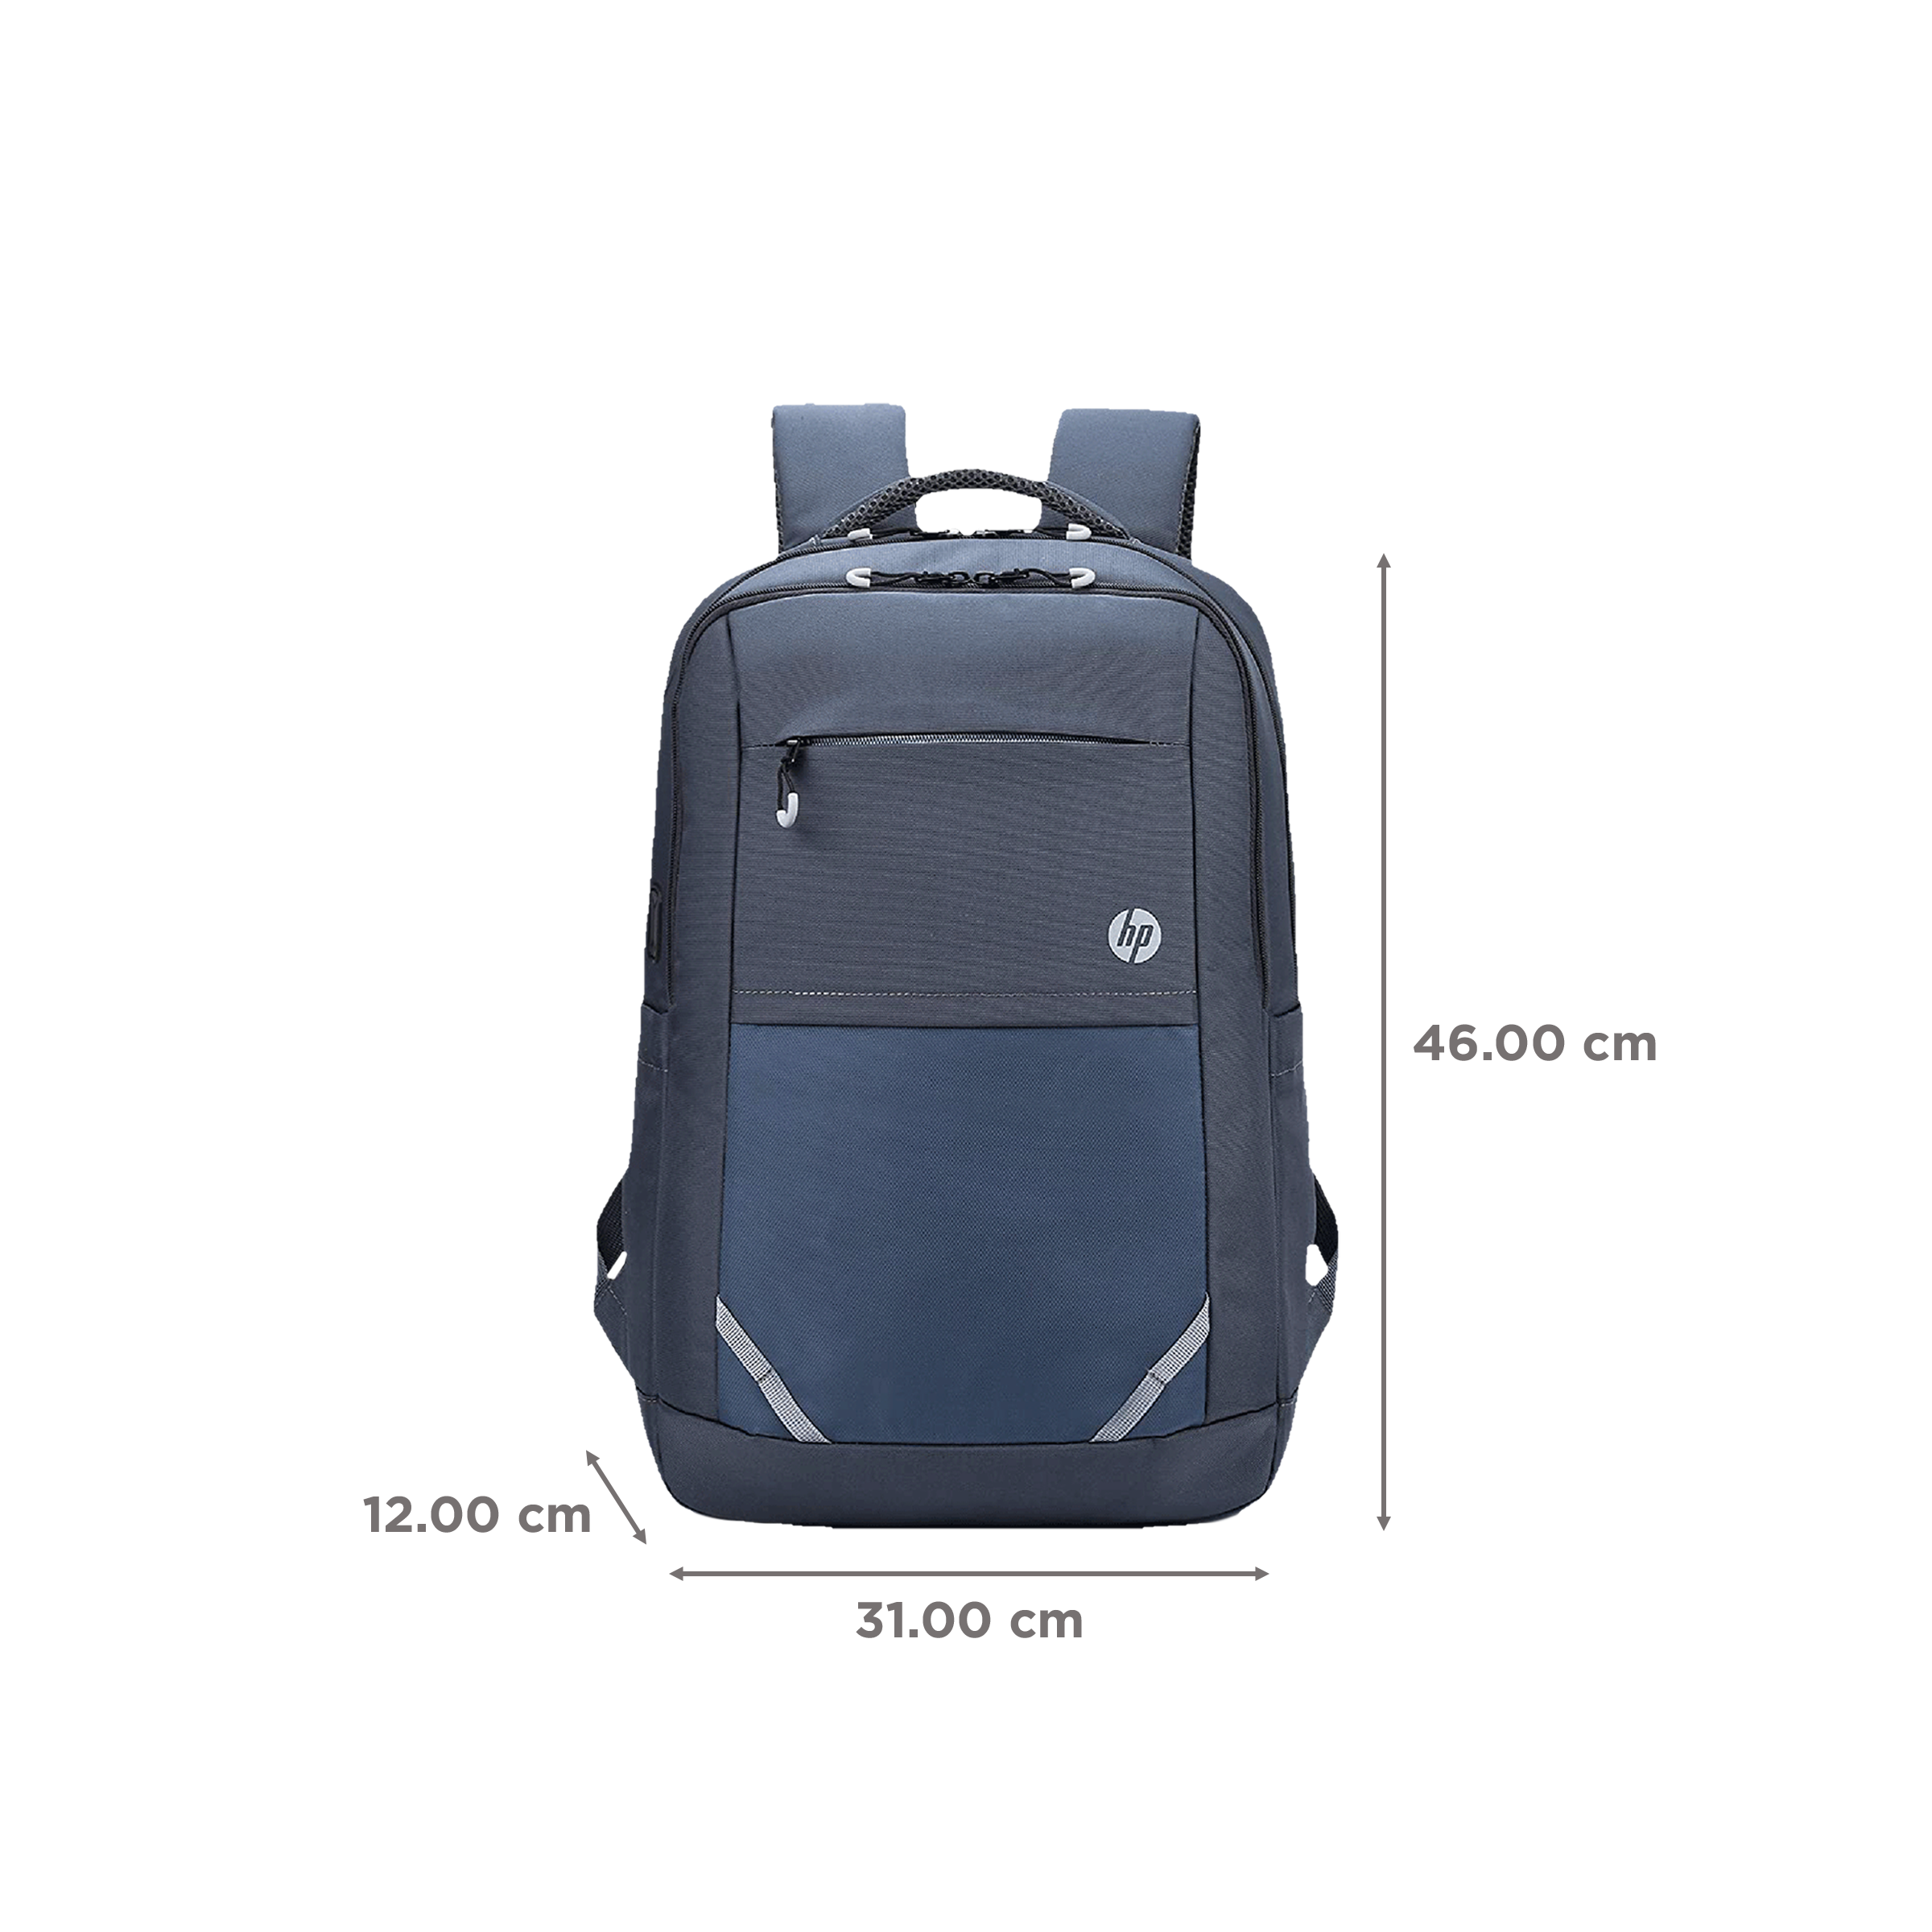 HP Powerup Backpack Review The Best Laptop Bag  YouTube